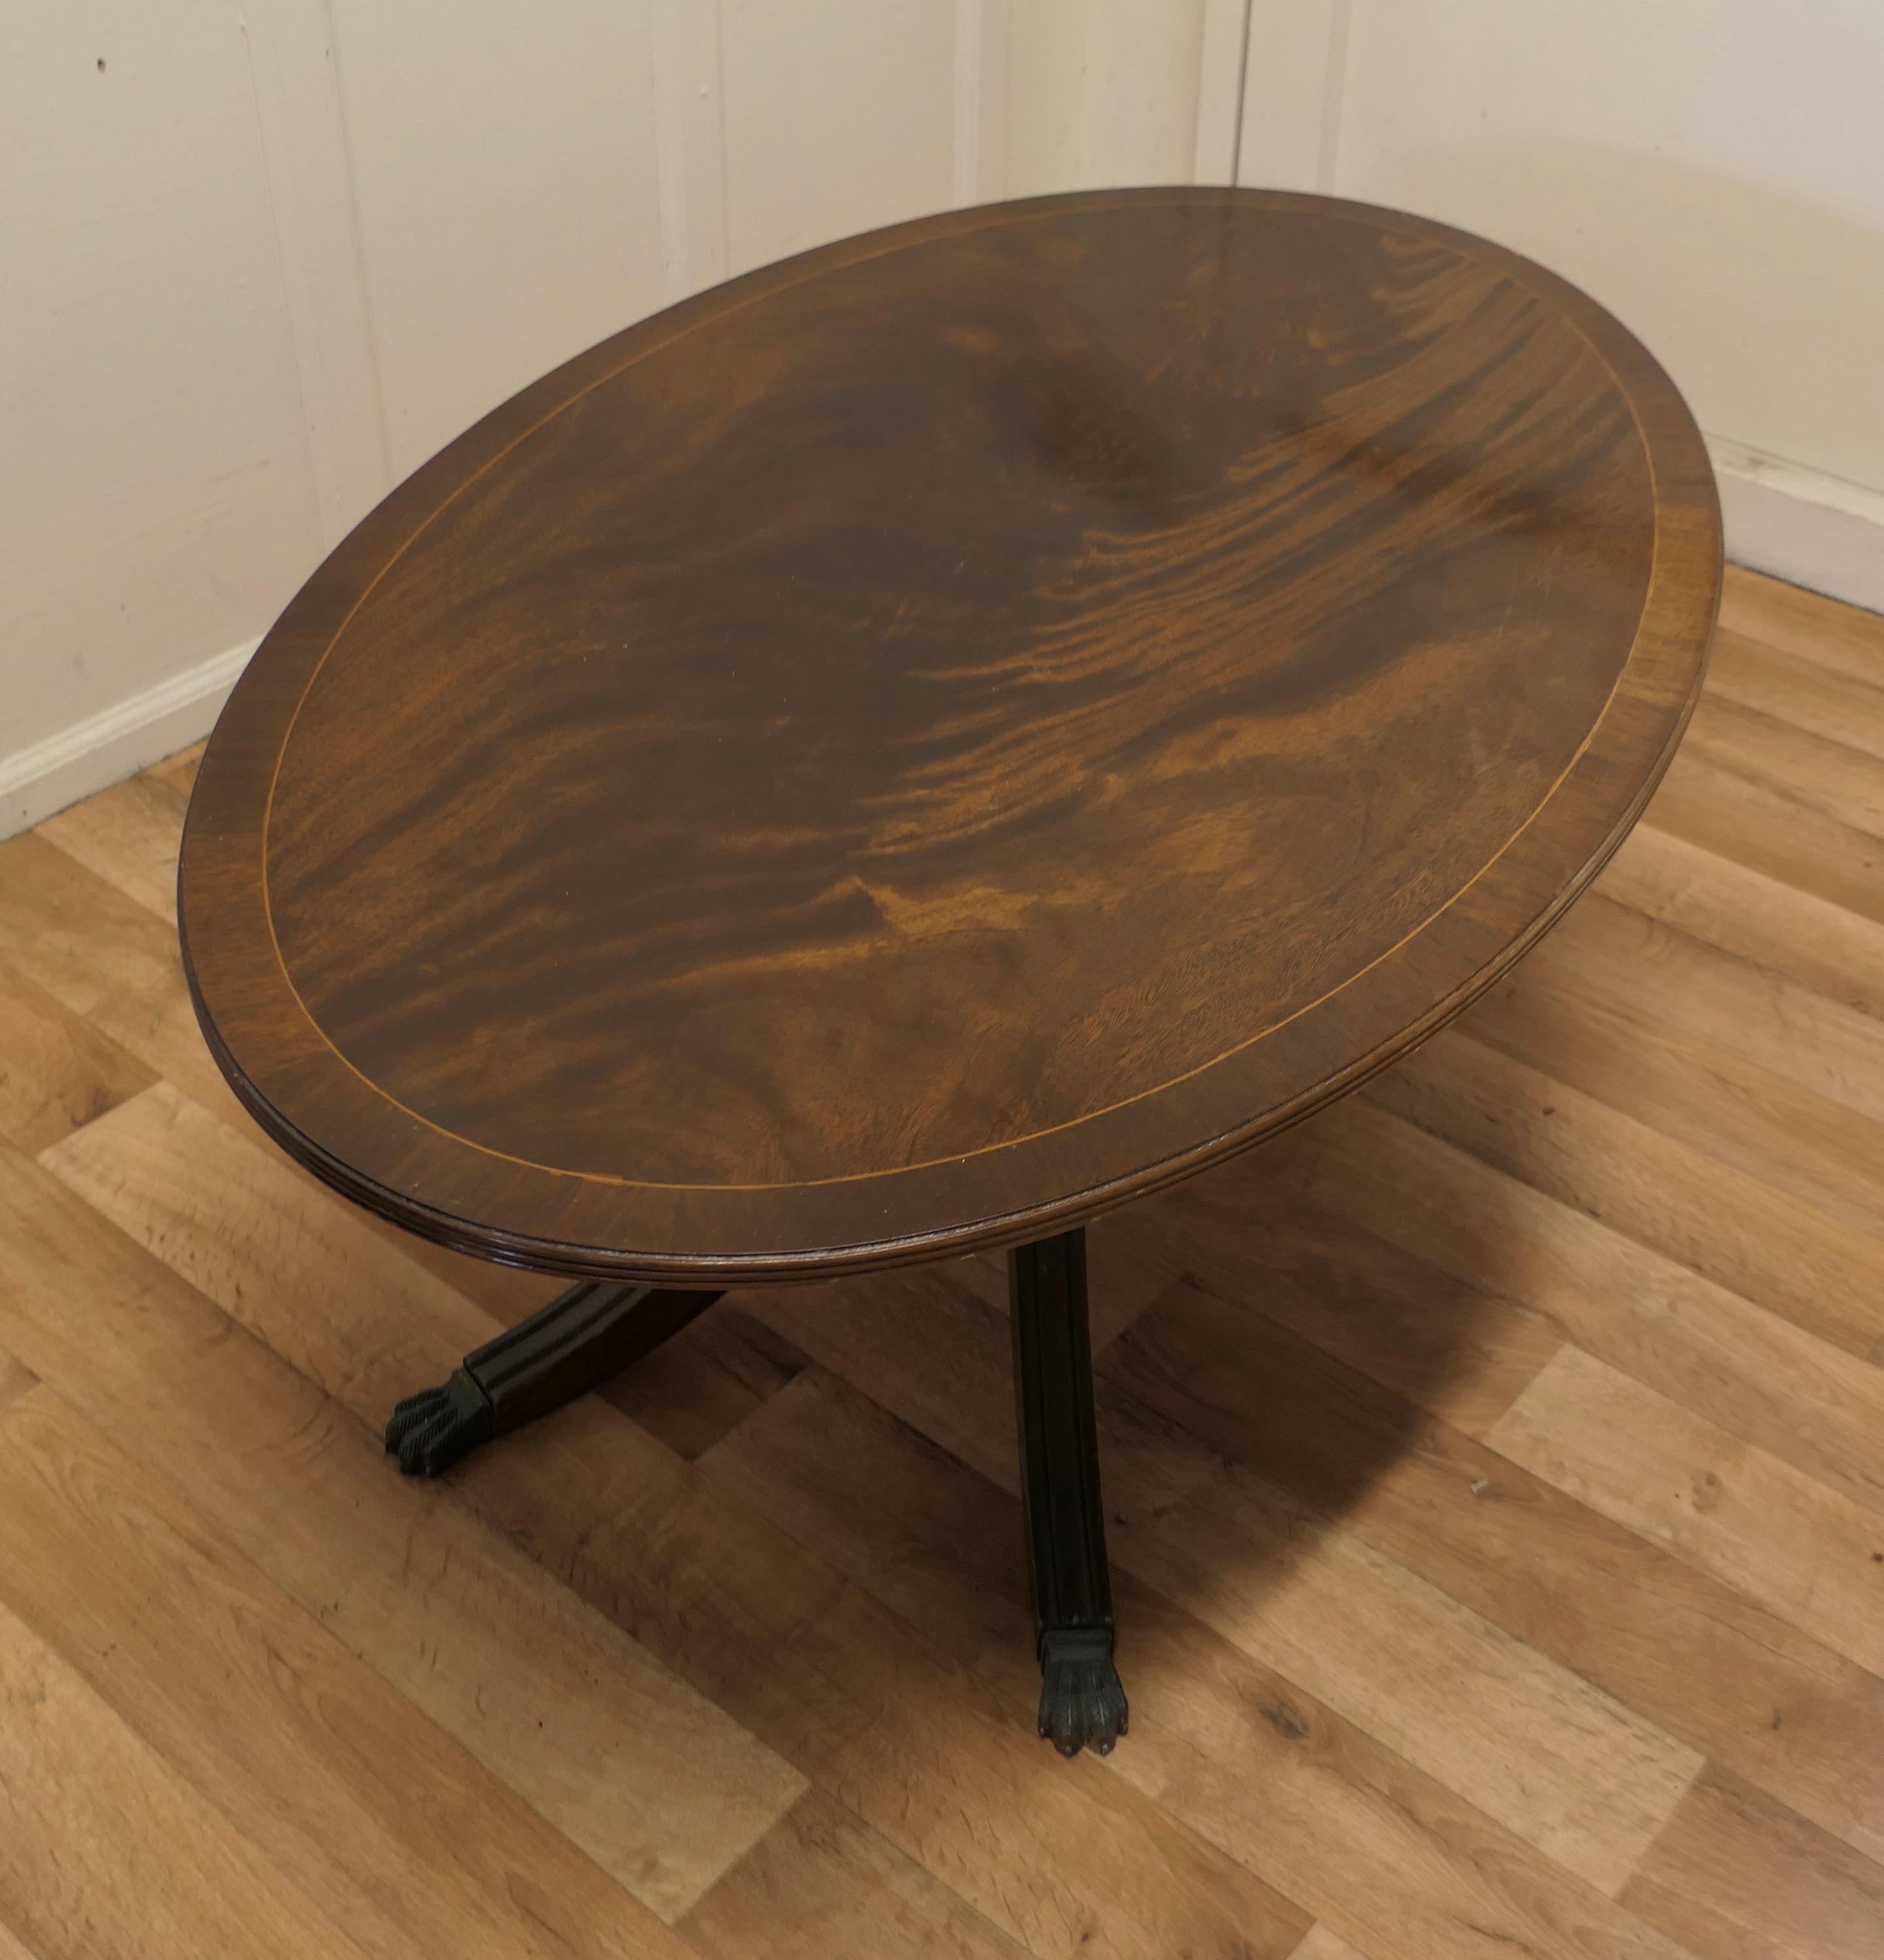 A large Regency Style flame mahogany coffee table

This is a very attractive piece, it is made in the style of an Oval regency dining table, with a decorative inlaid border
The table is good quality, it stands on a 4 footed leg and has a